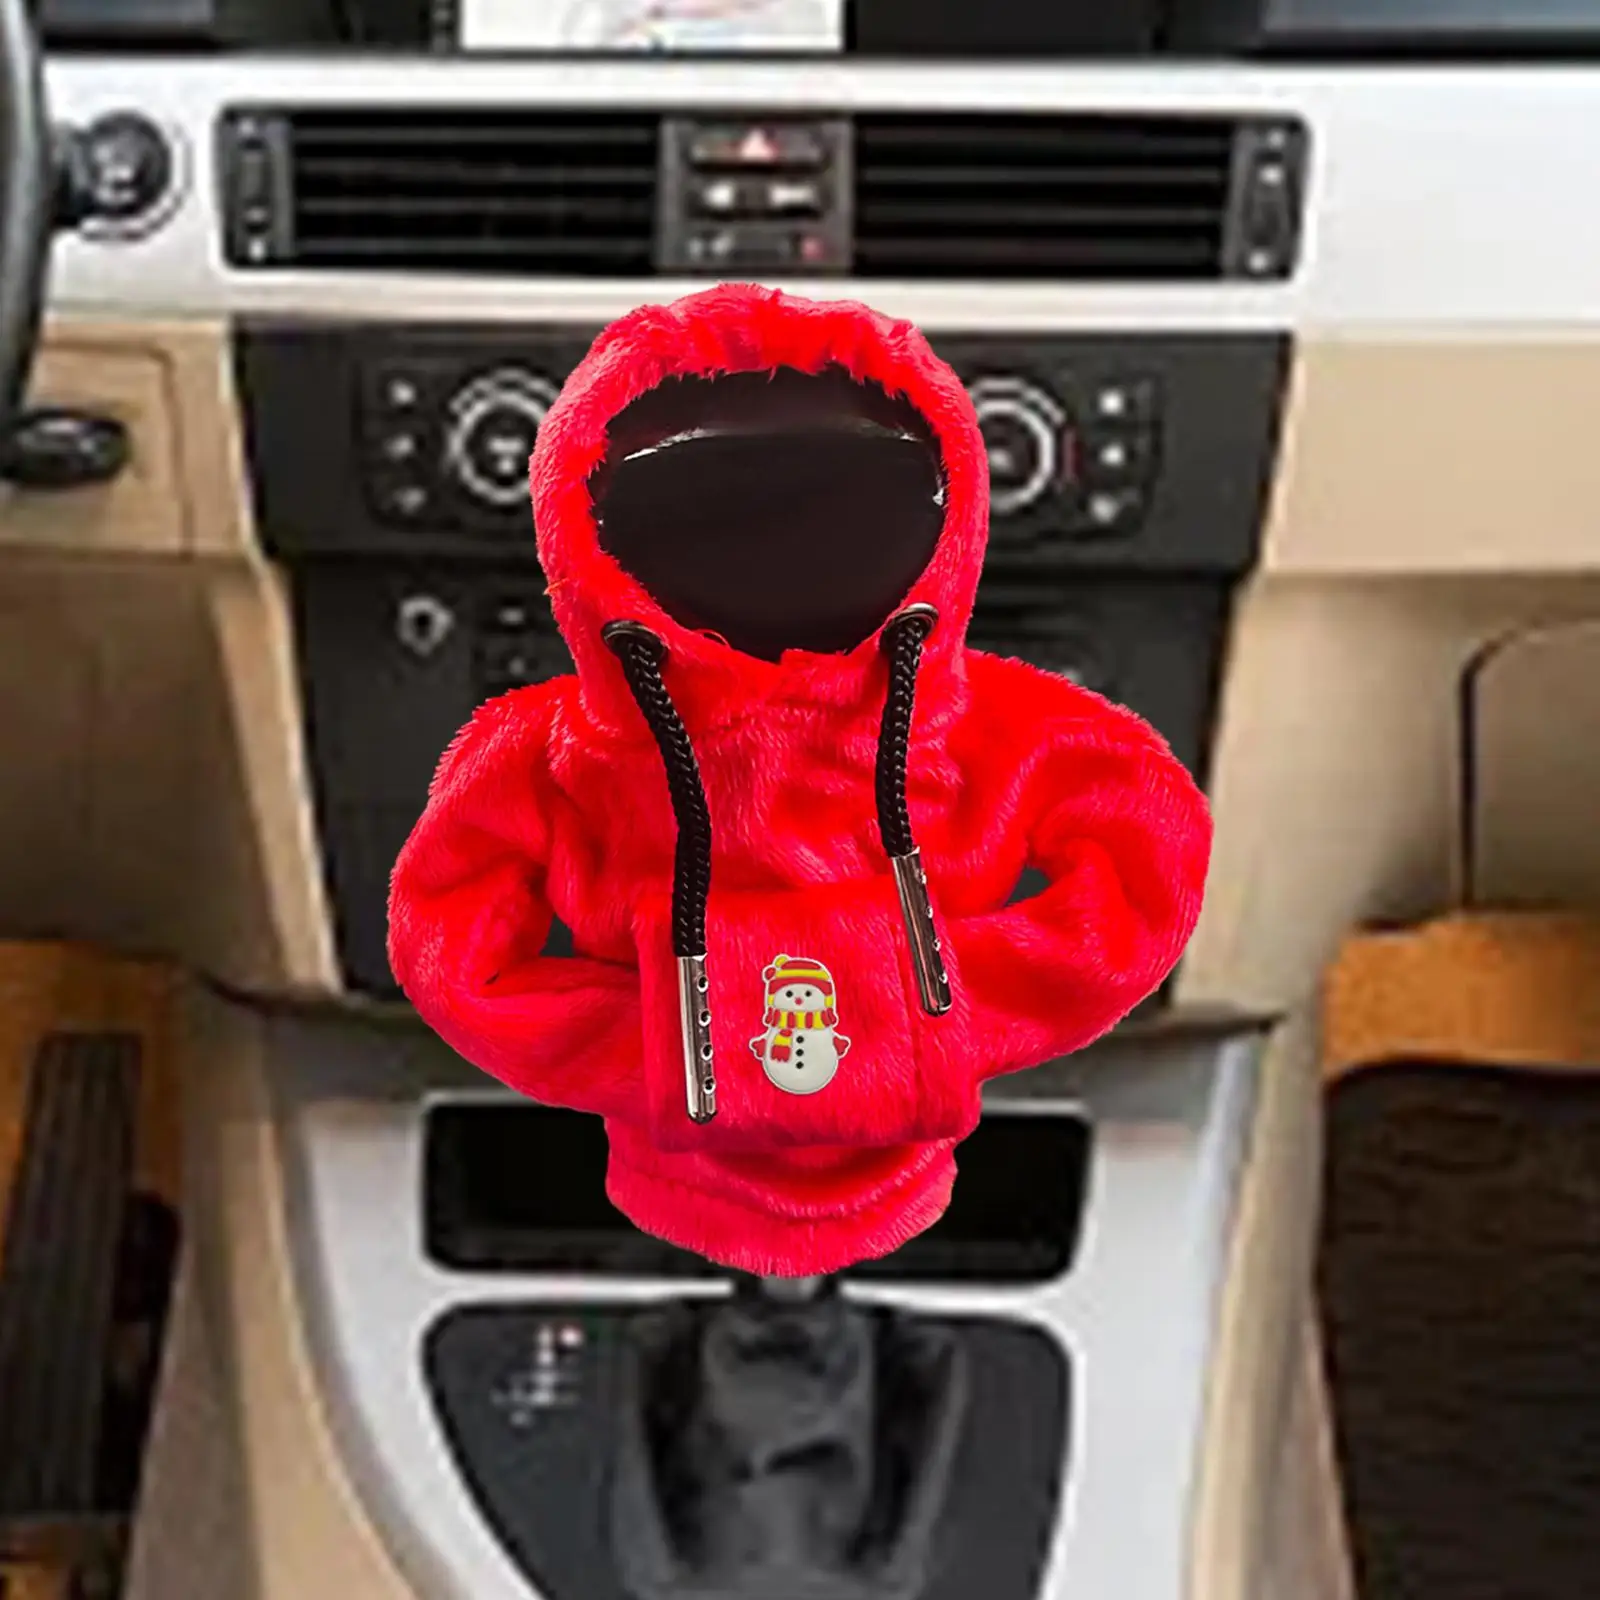 Christmas Gear Shifter Lever Knob Cover Xmas Decoration Decoration Holiday Funny Universal Hoodie Sweatshirt Shifter Protector